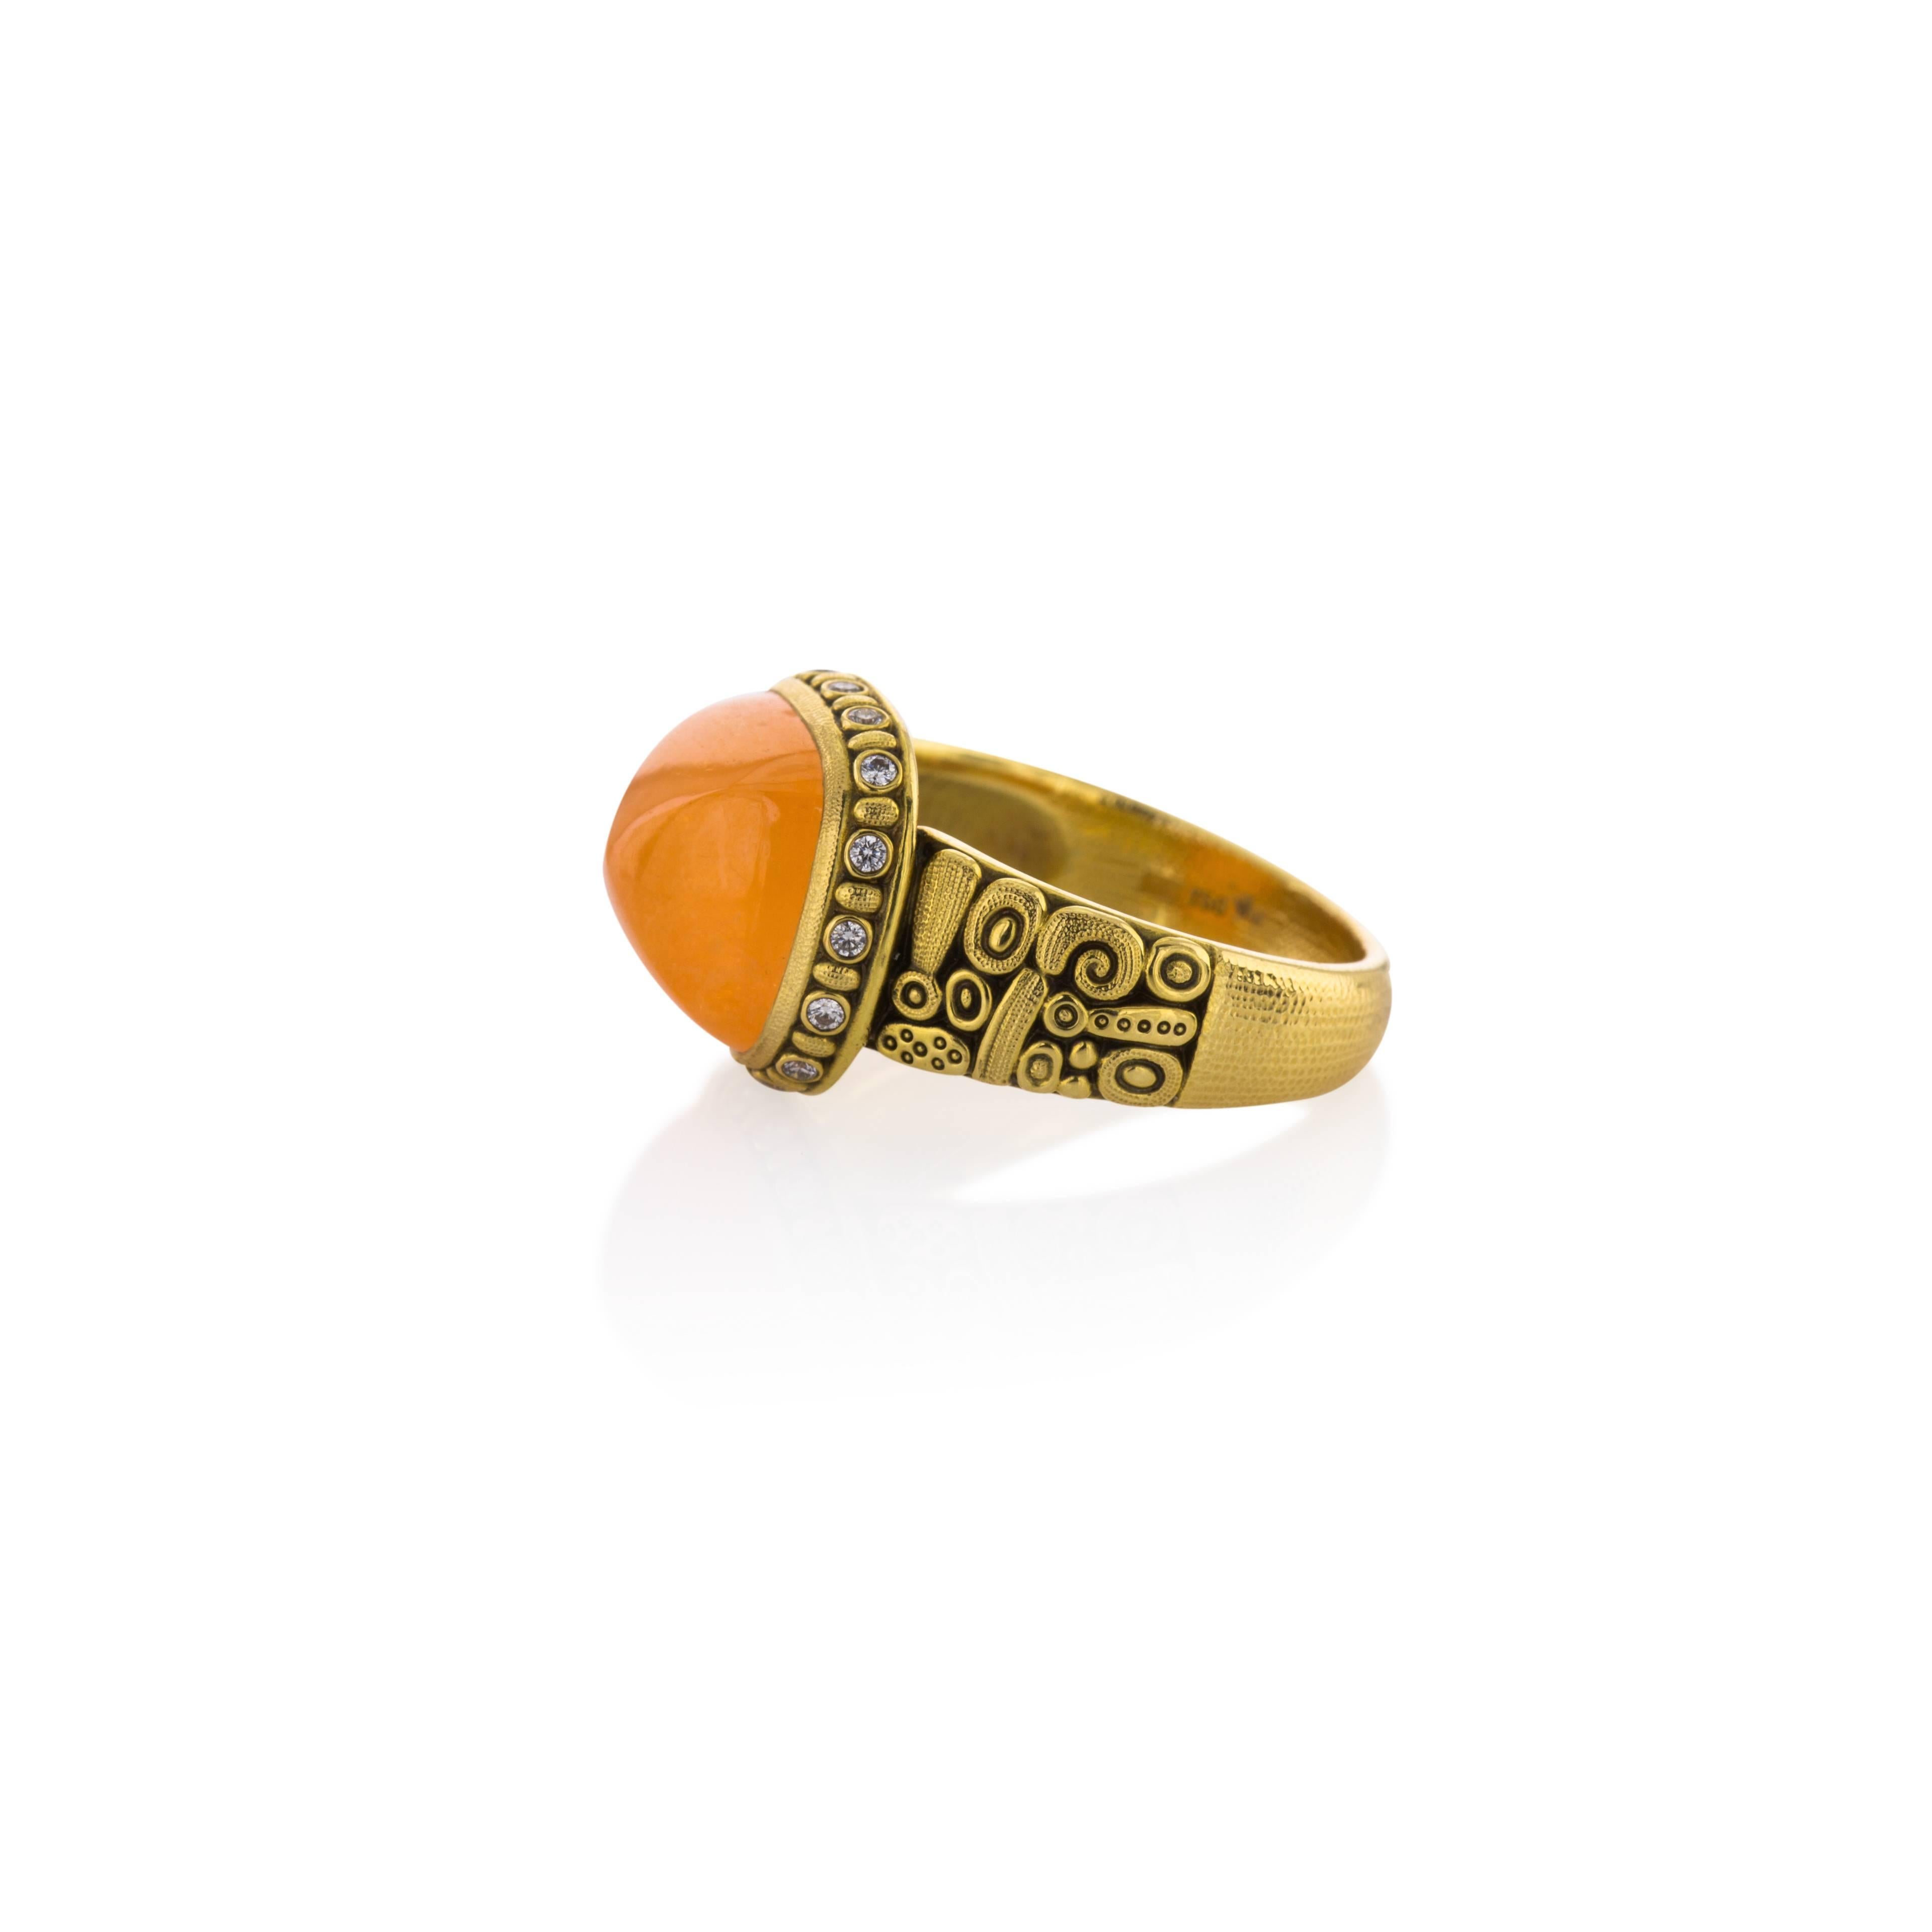 Ring in 18K Yellow Gold 9.03ct Mandarin Garnet with 13 Round Full Cut Diamonds Bezel Set.  There are .16cts Diamonds.  Made by Designer Alex Sepkus.  This ring is new and and has the signature detail on the sides that Alex Sepkus is famous for. 